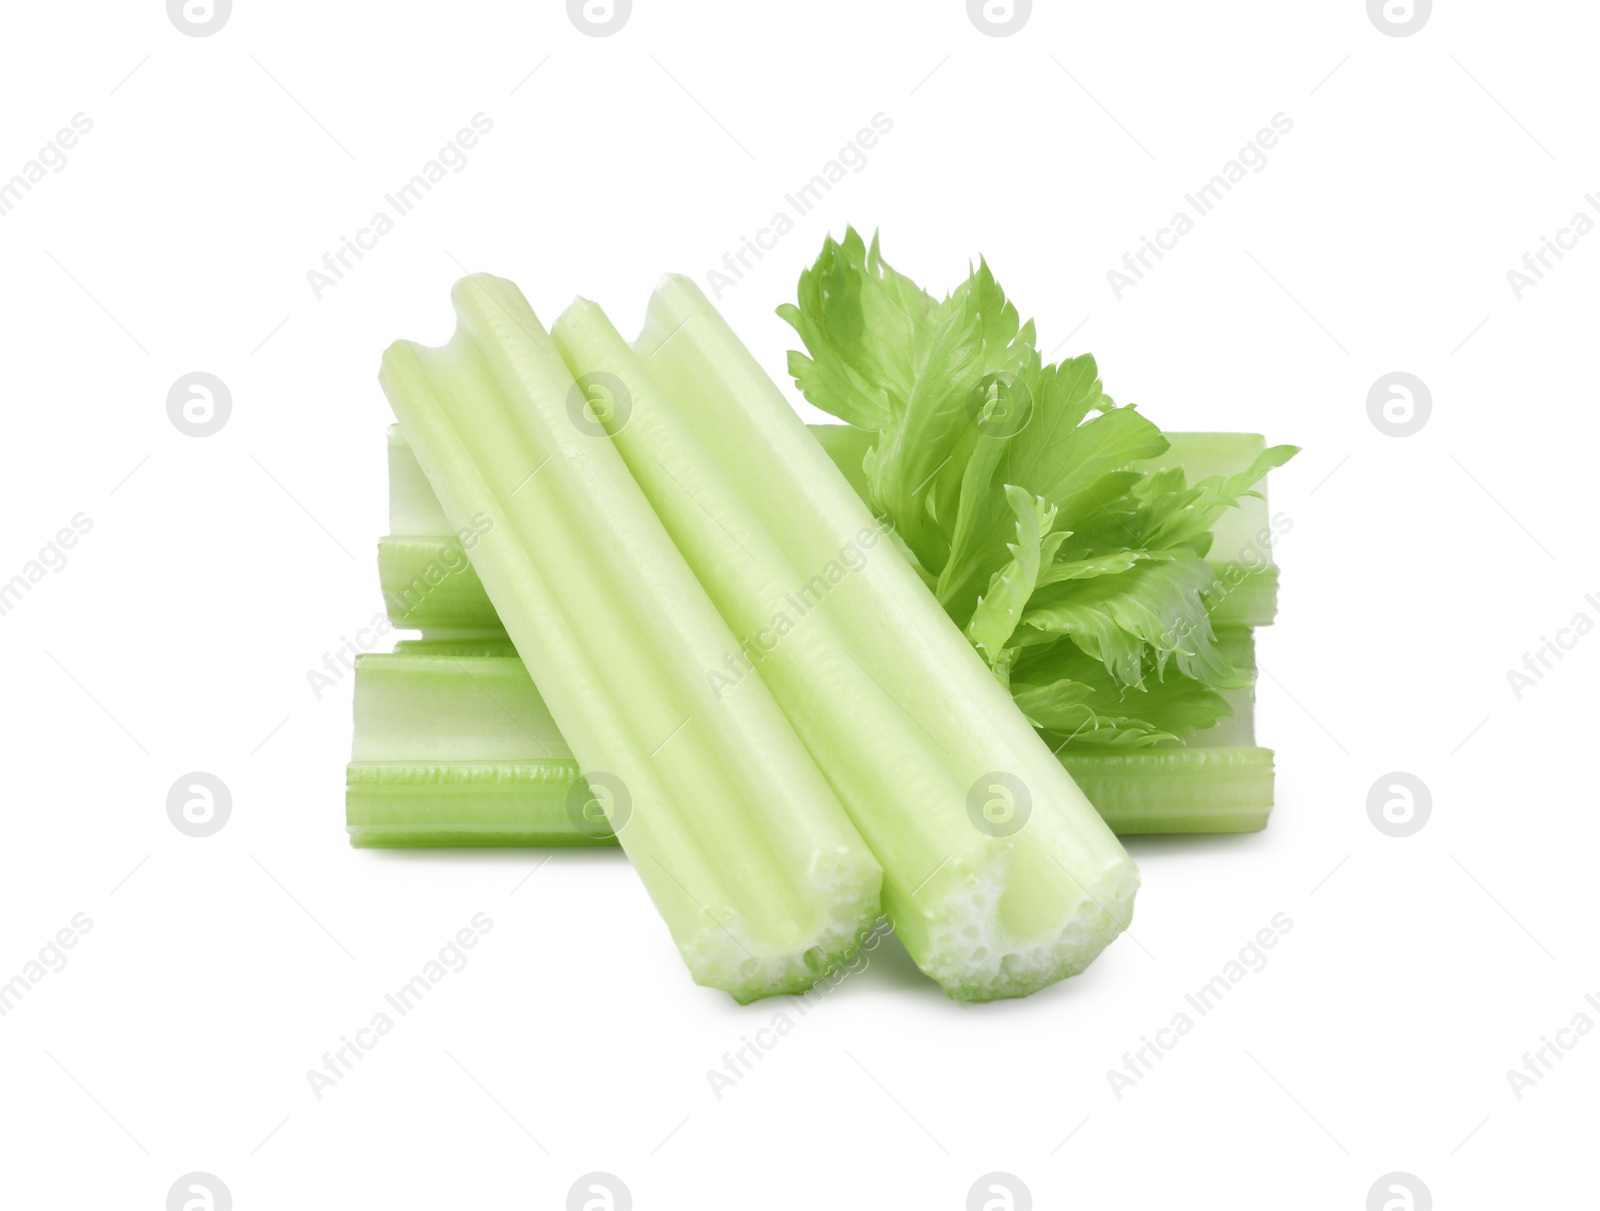 Photo of Fresh cut celery stalks and leaves on white background